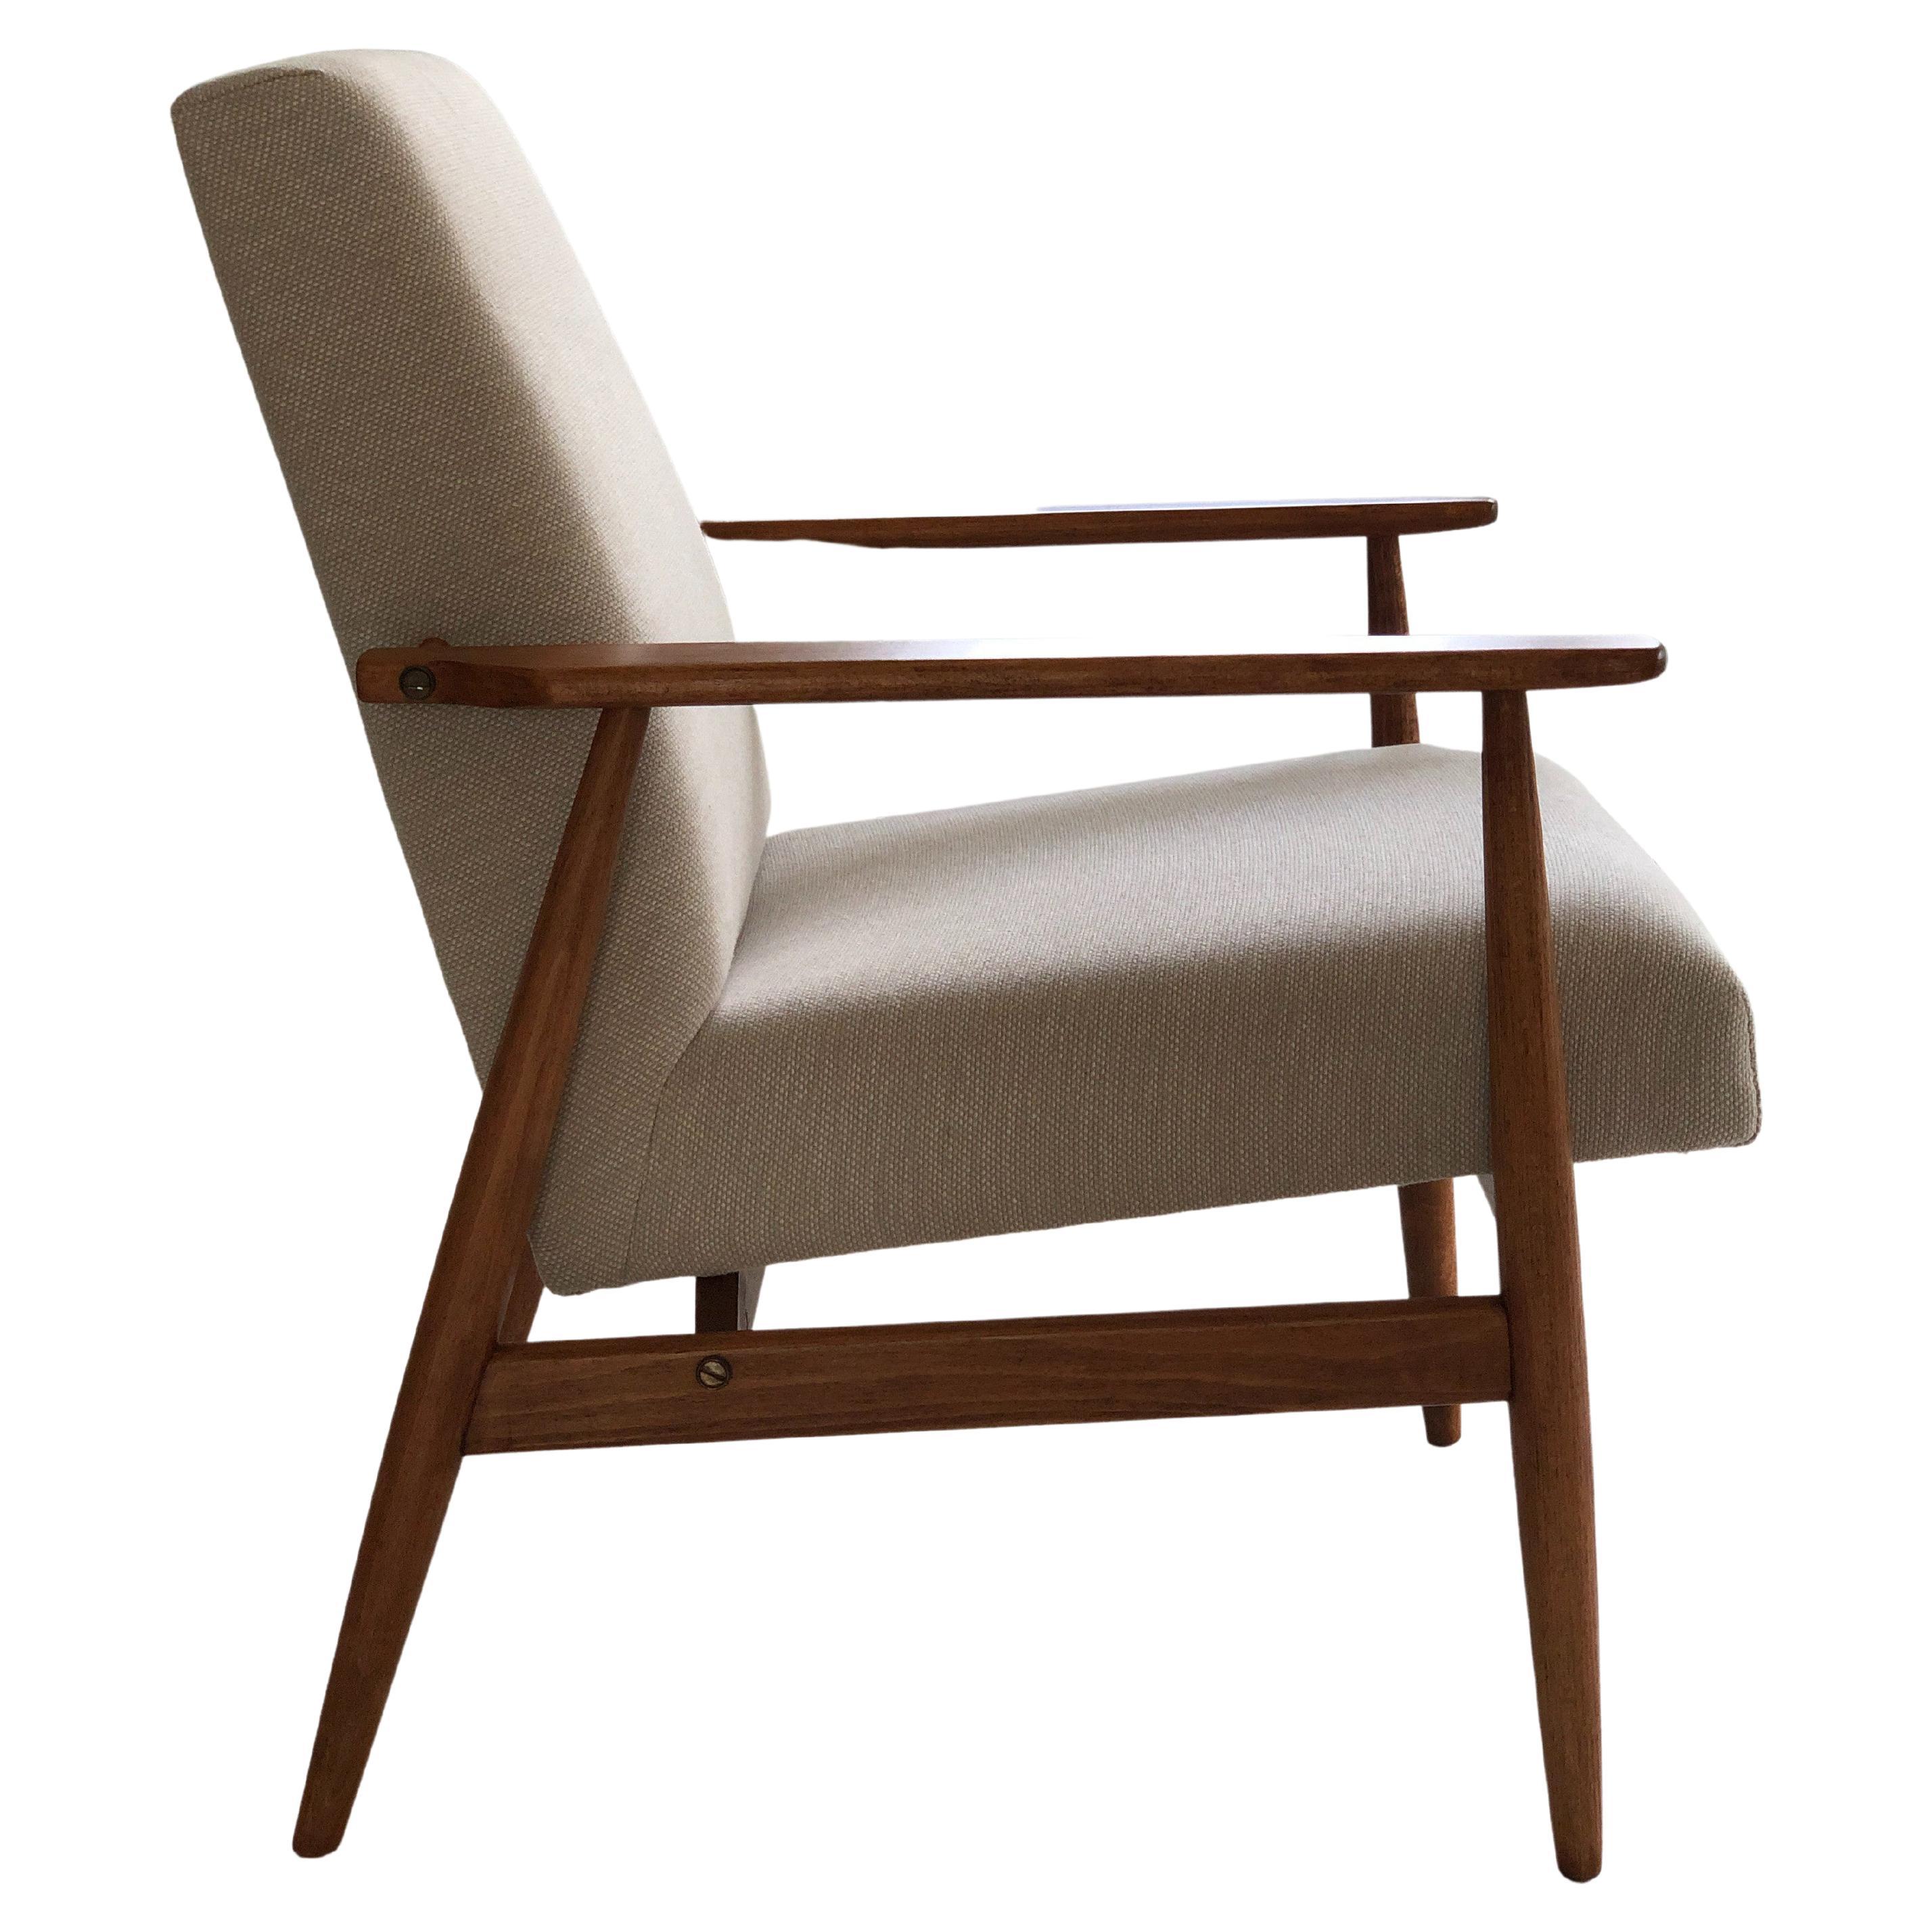 Midcentury Armchair by Henryk Lis in Beige Cotton Linen Upholstery, 1960s For Sale